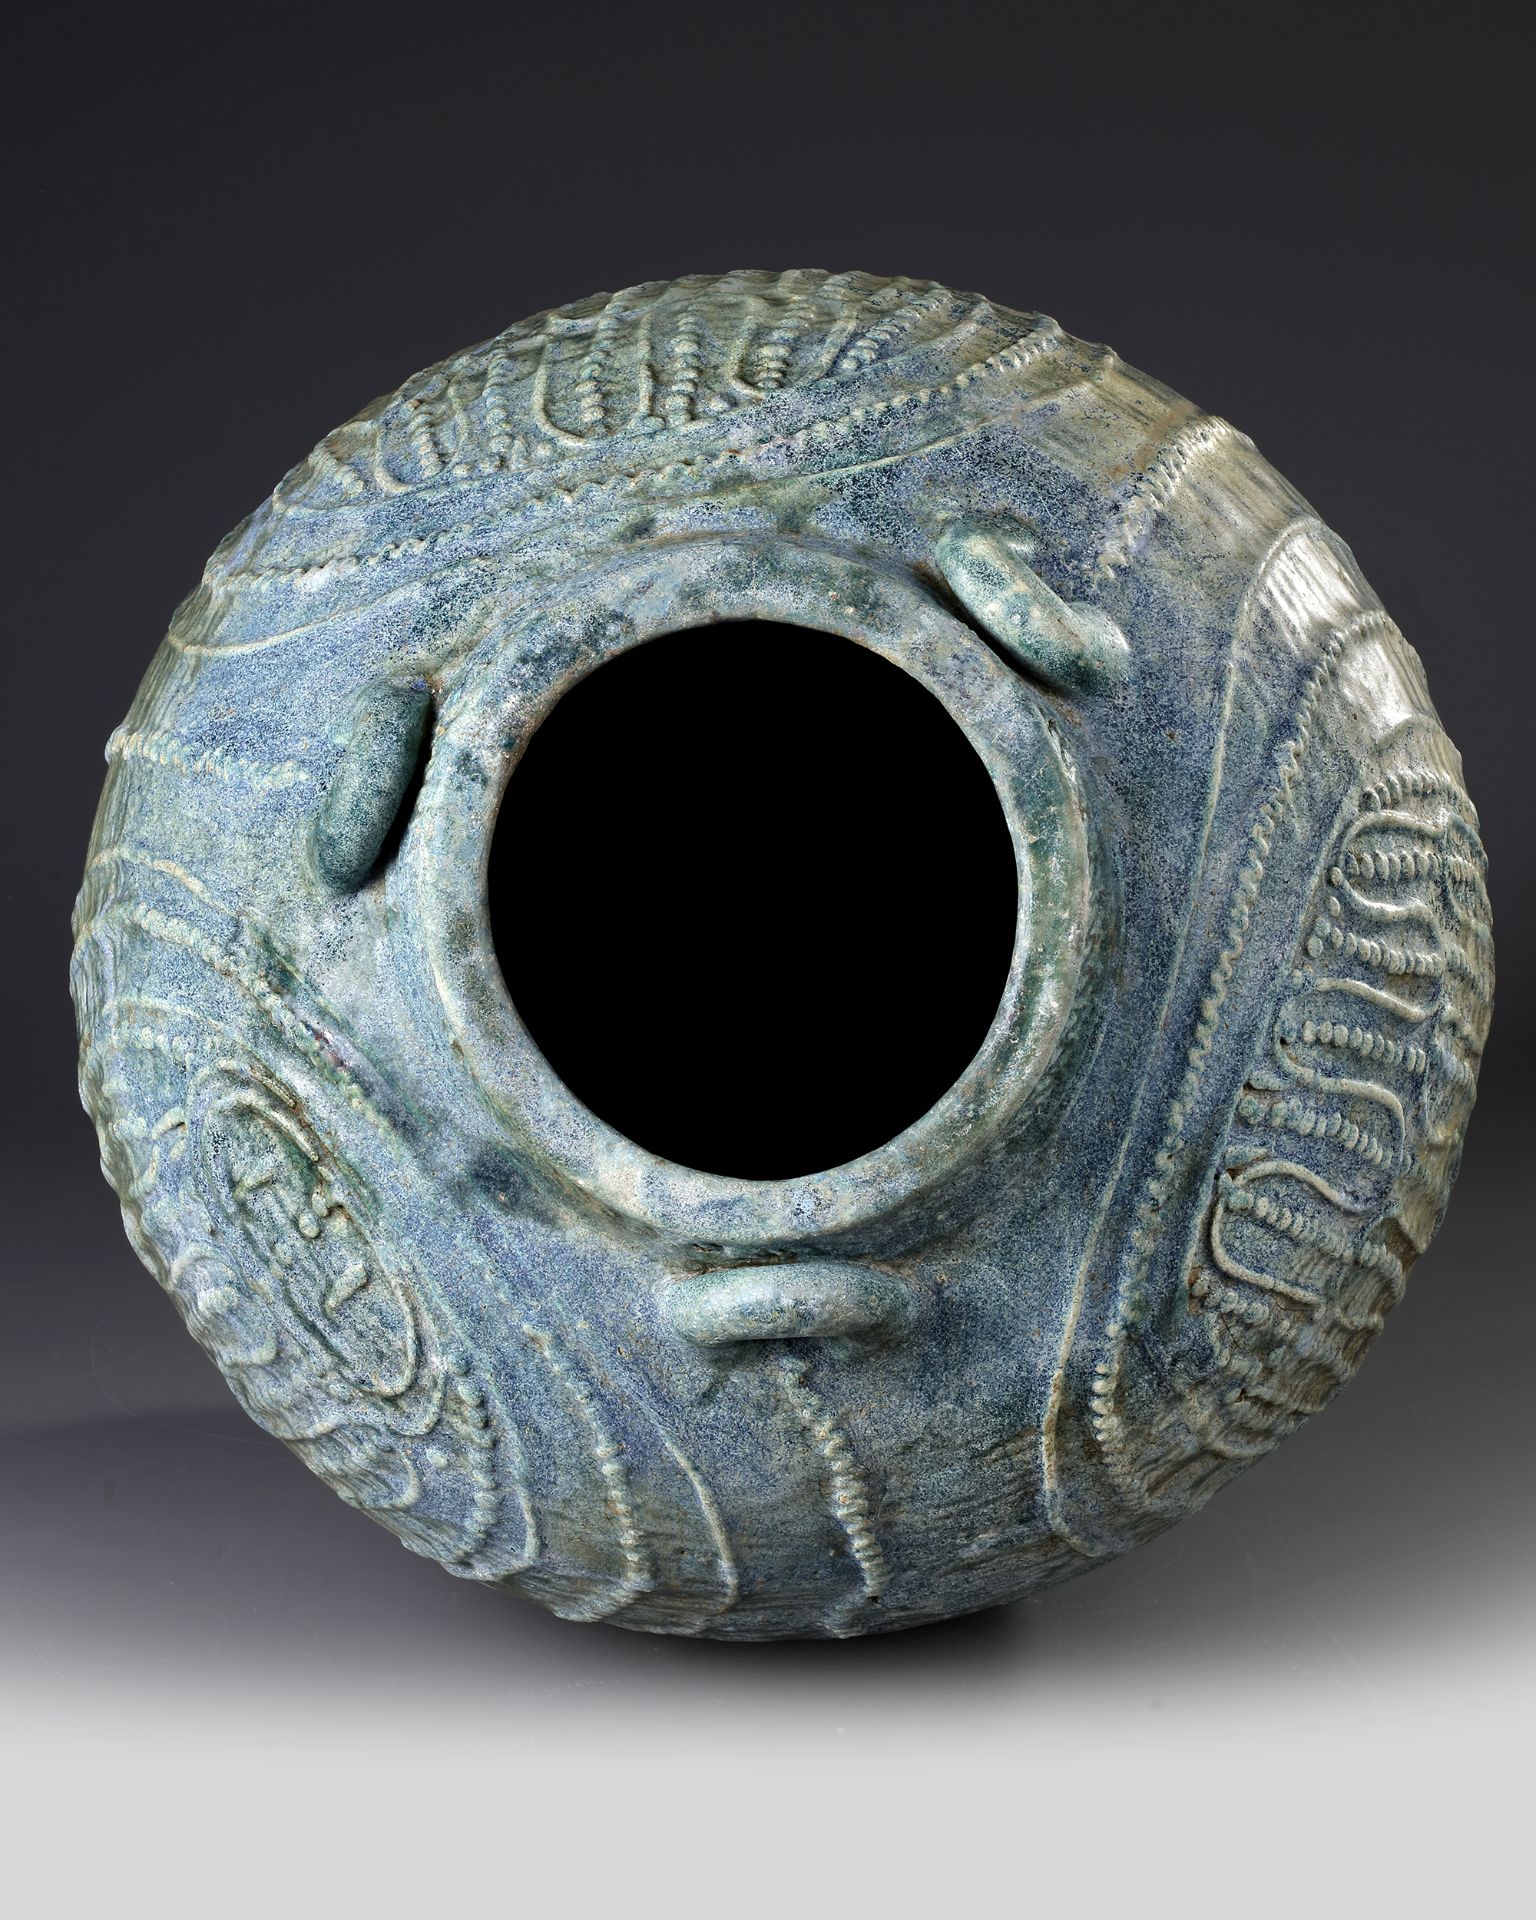 A LARGE POST SASSANIAN TURQUOISE GLAZED POTTERY STORAGE JAR, PERSIA OR IRAQ, 7TH-8TH CENTURY - Image 5 of 5